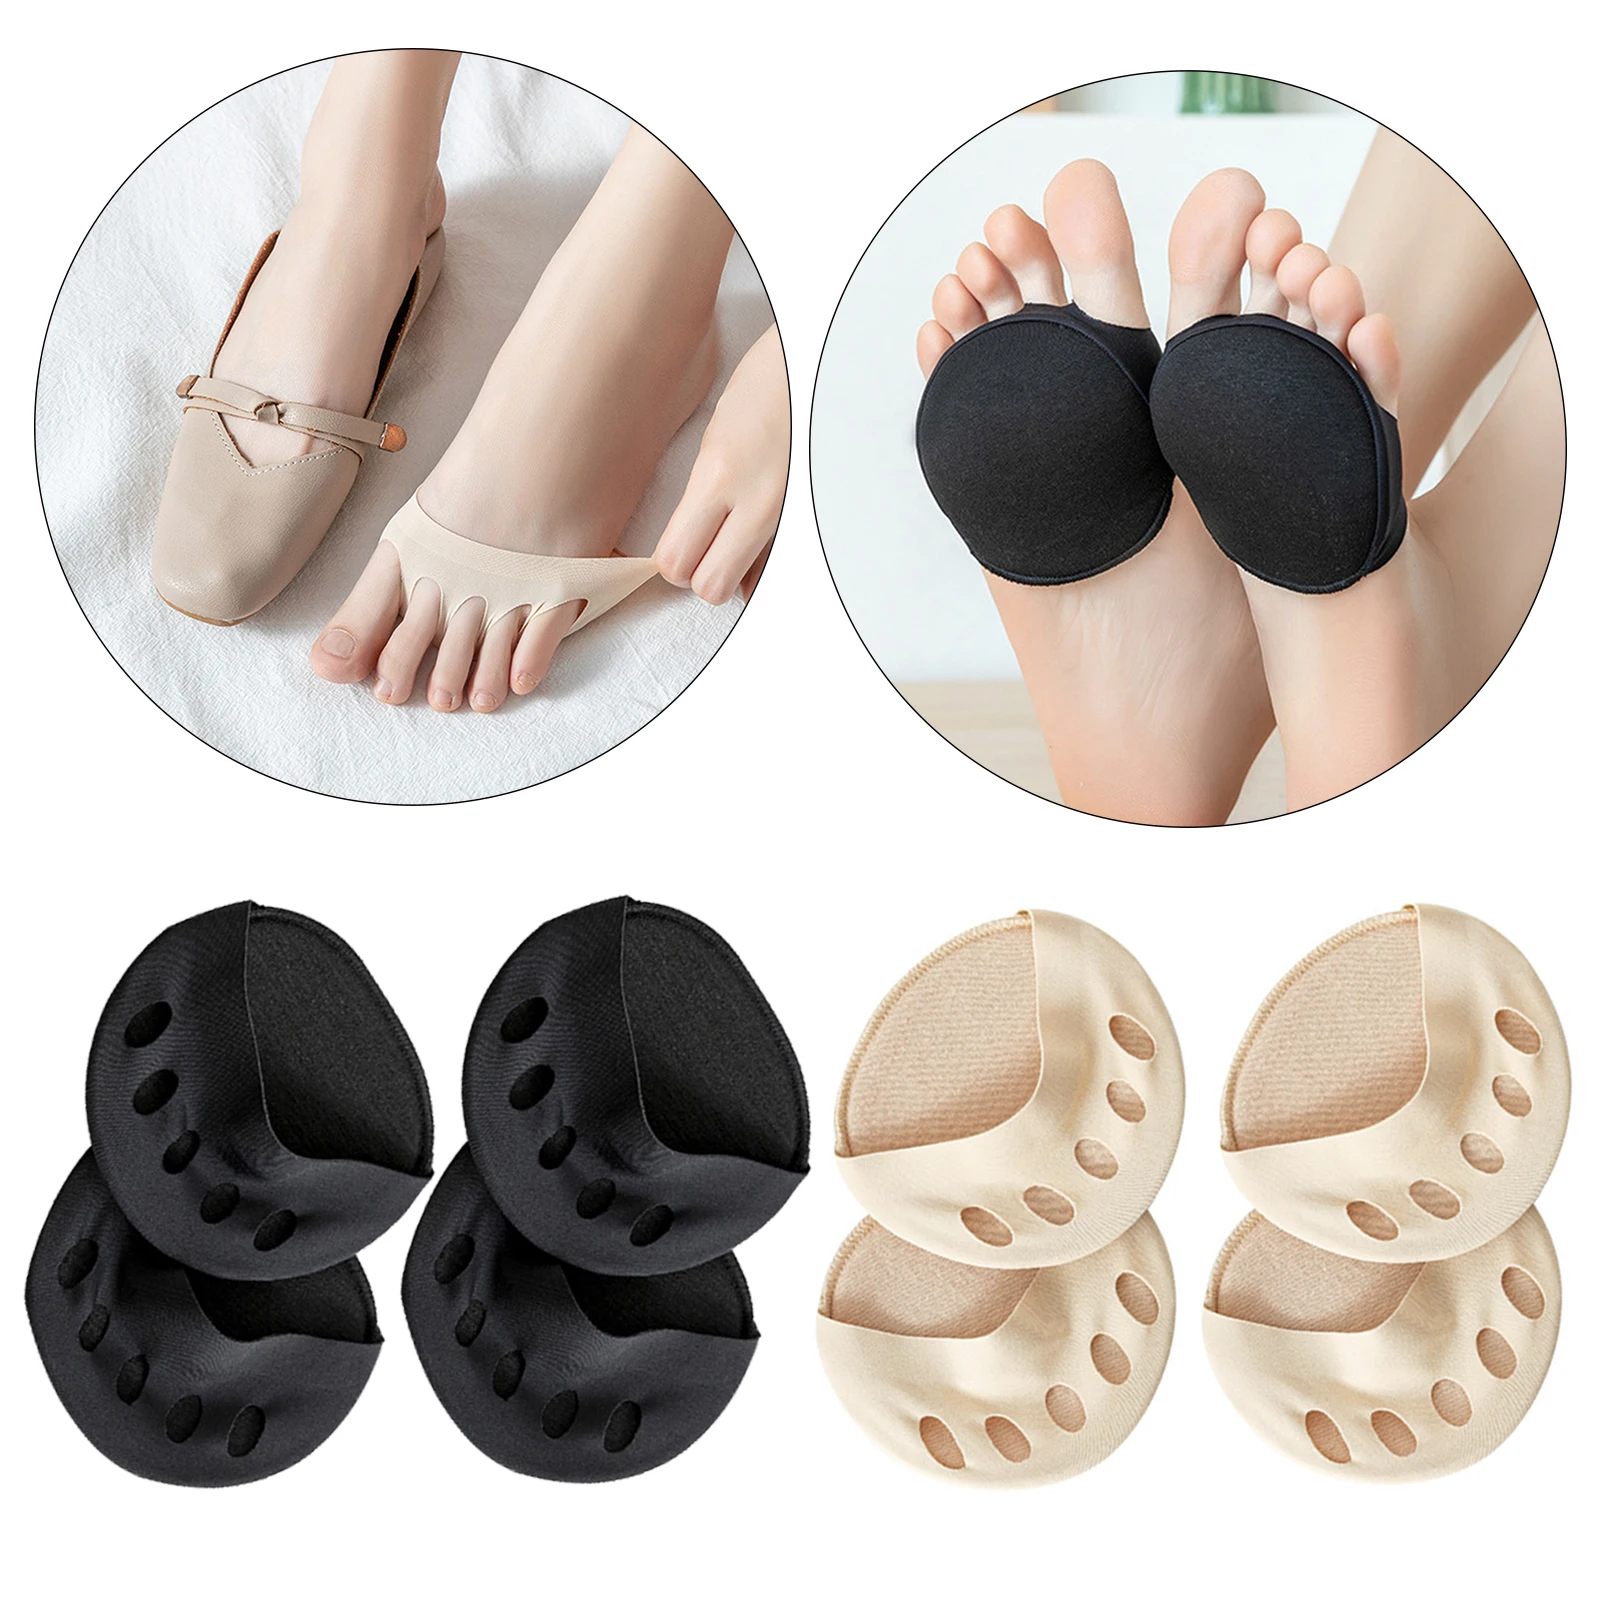 2Pair Metatarsal Pads Cotton Hig Heels Ball of Foot Cushions Pain Soft Insoles Forefoot Care Support Protector